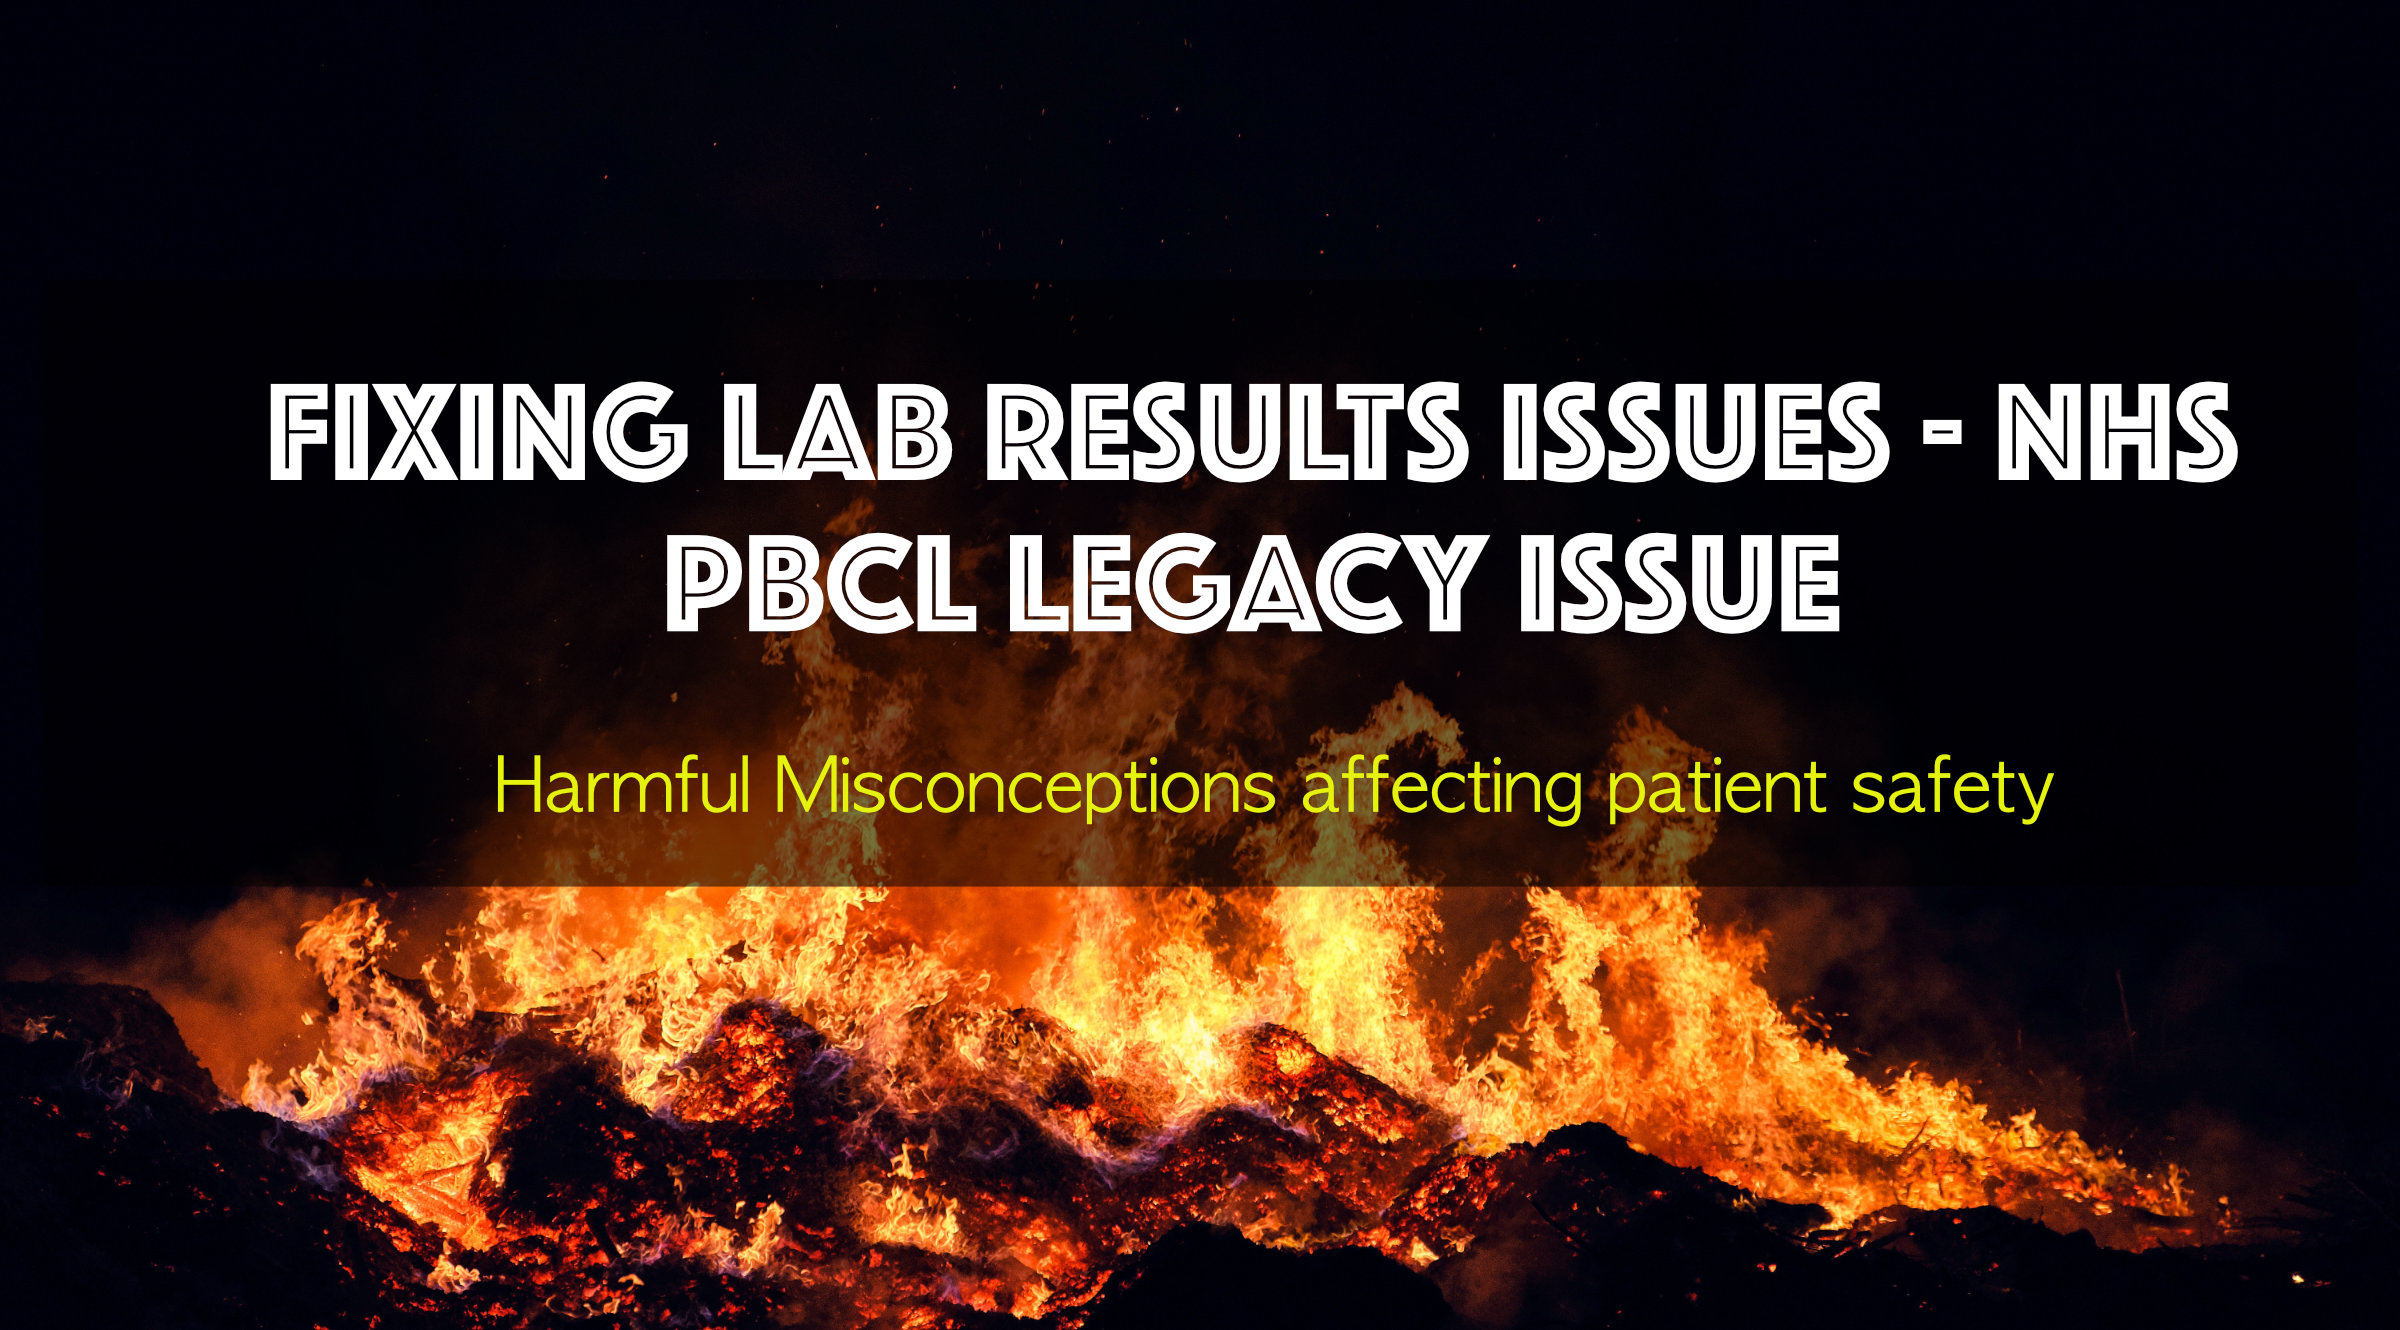 Fixing the NHS PBCL Legacy issue affecting lab results - common misconceptions